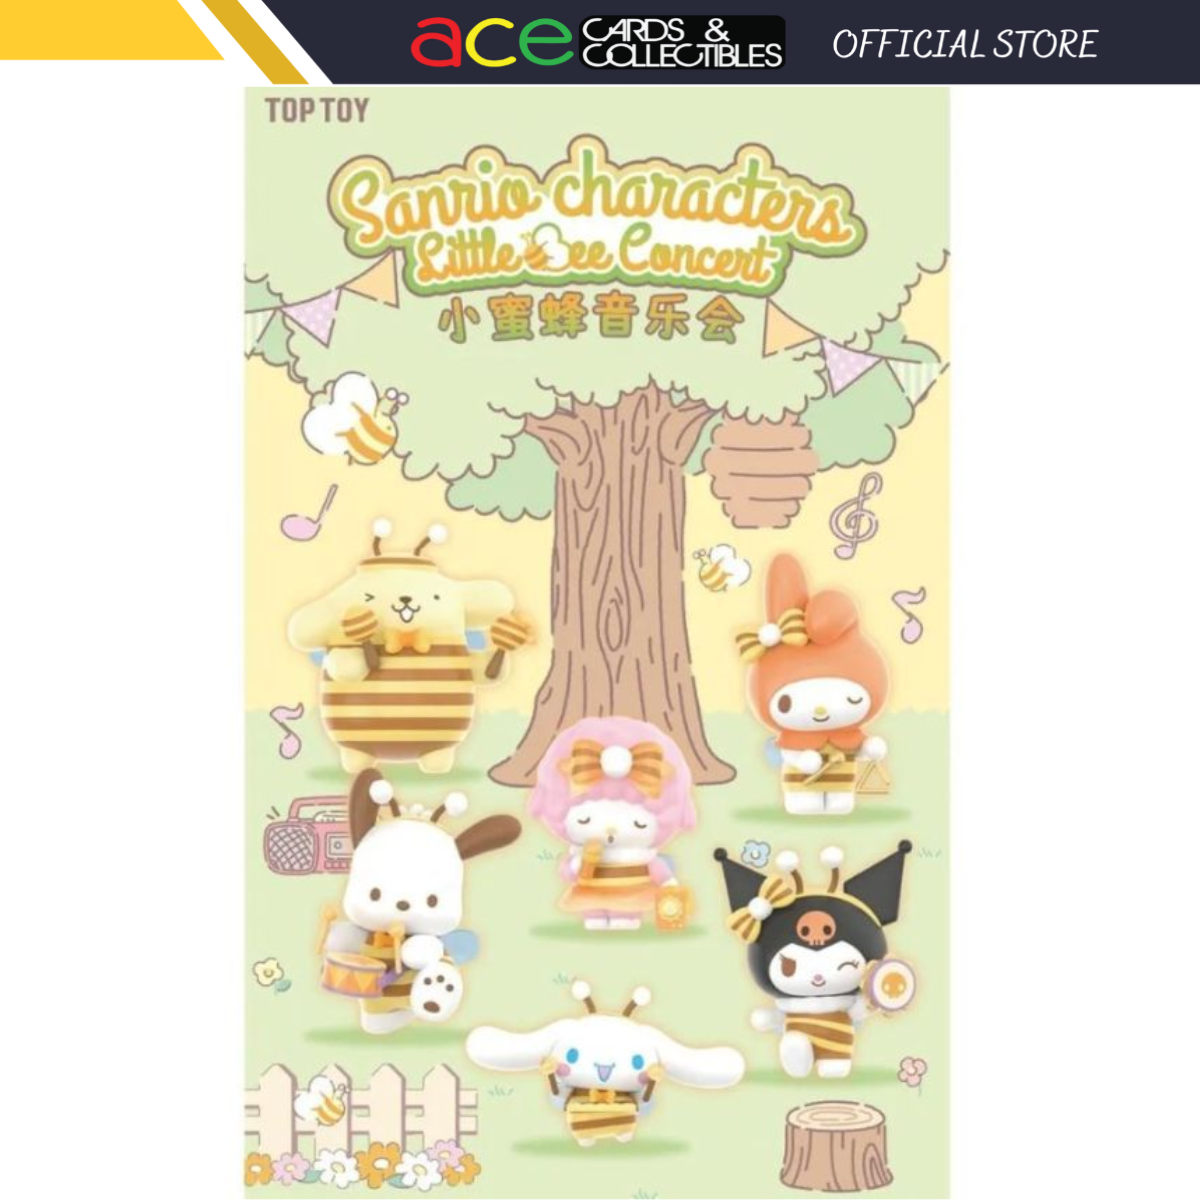 Top Toy x Sanrio Characters Little Bee Concert Series-Single (Random)-TopToy-Ace Cards & Collectibles